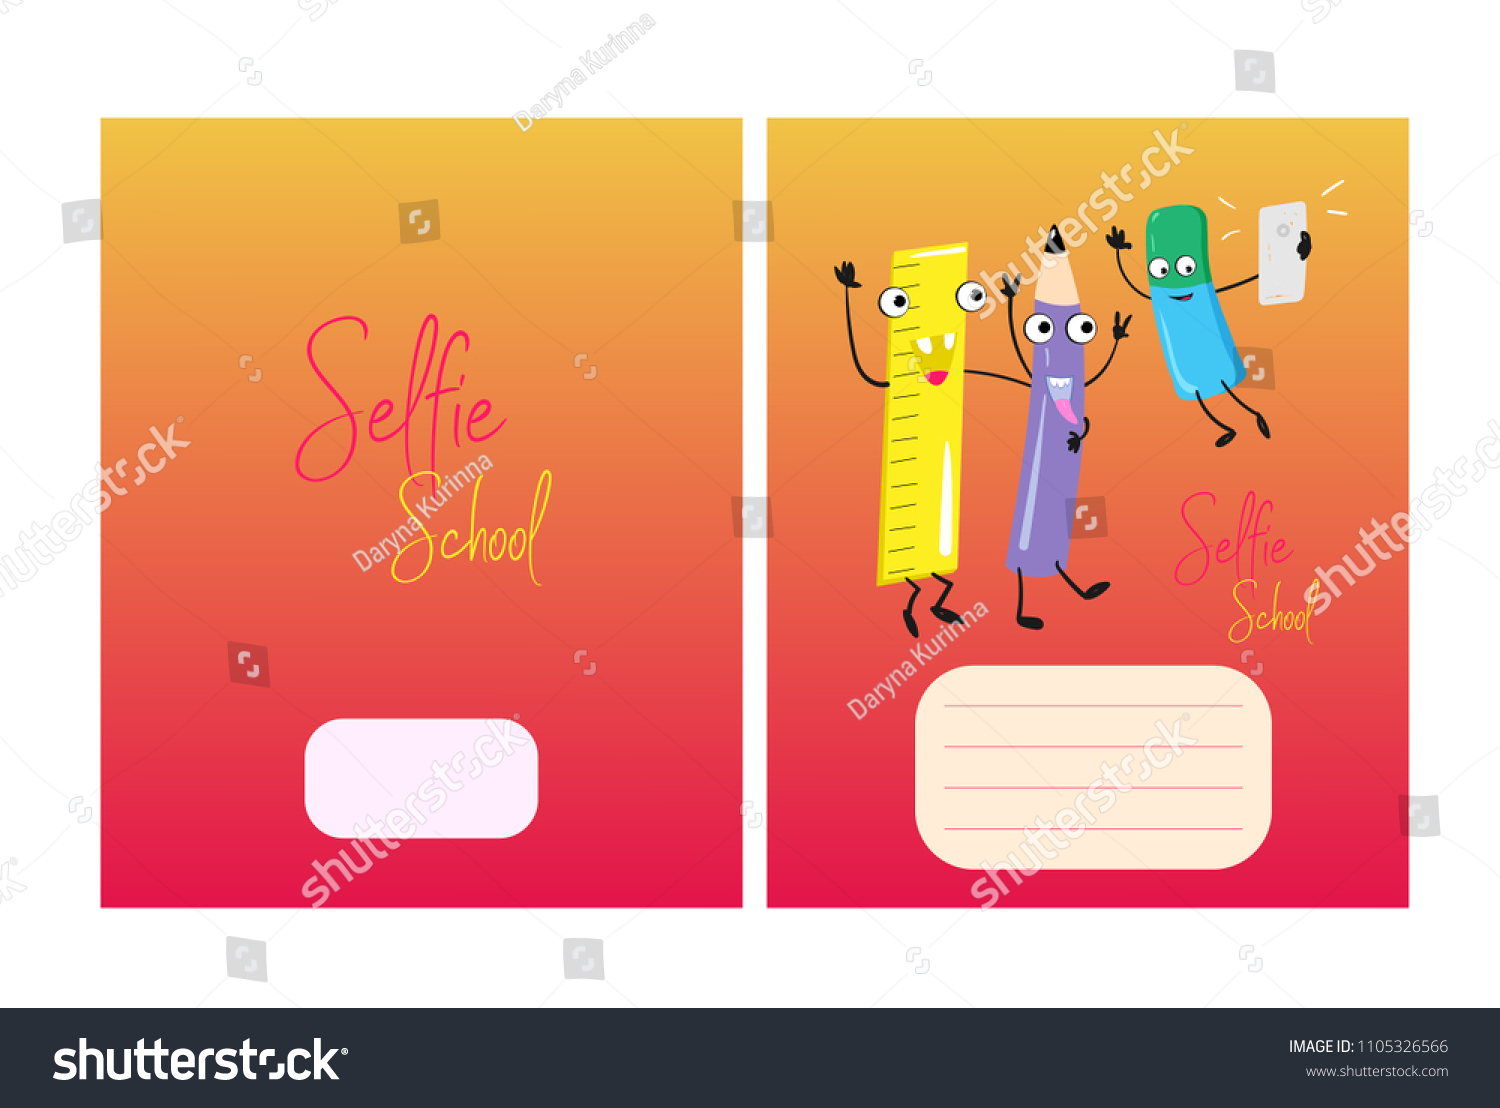 Notebook Cover Design Template from image.shutterstock.com